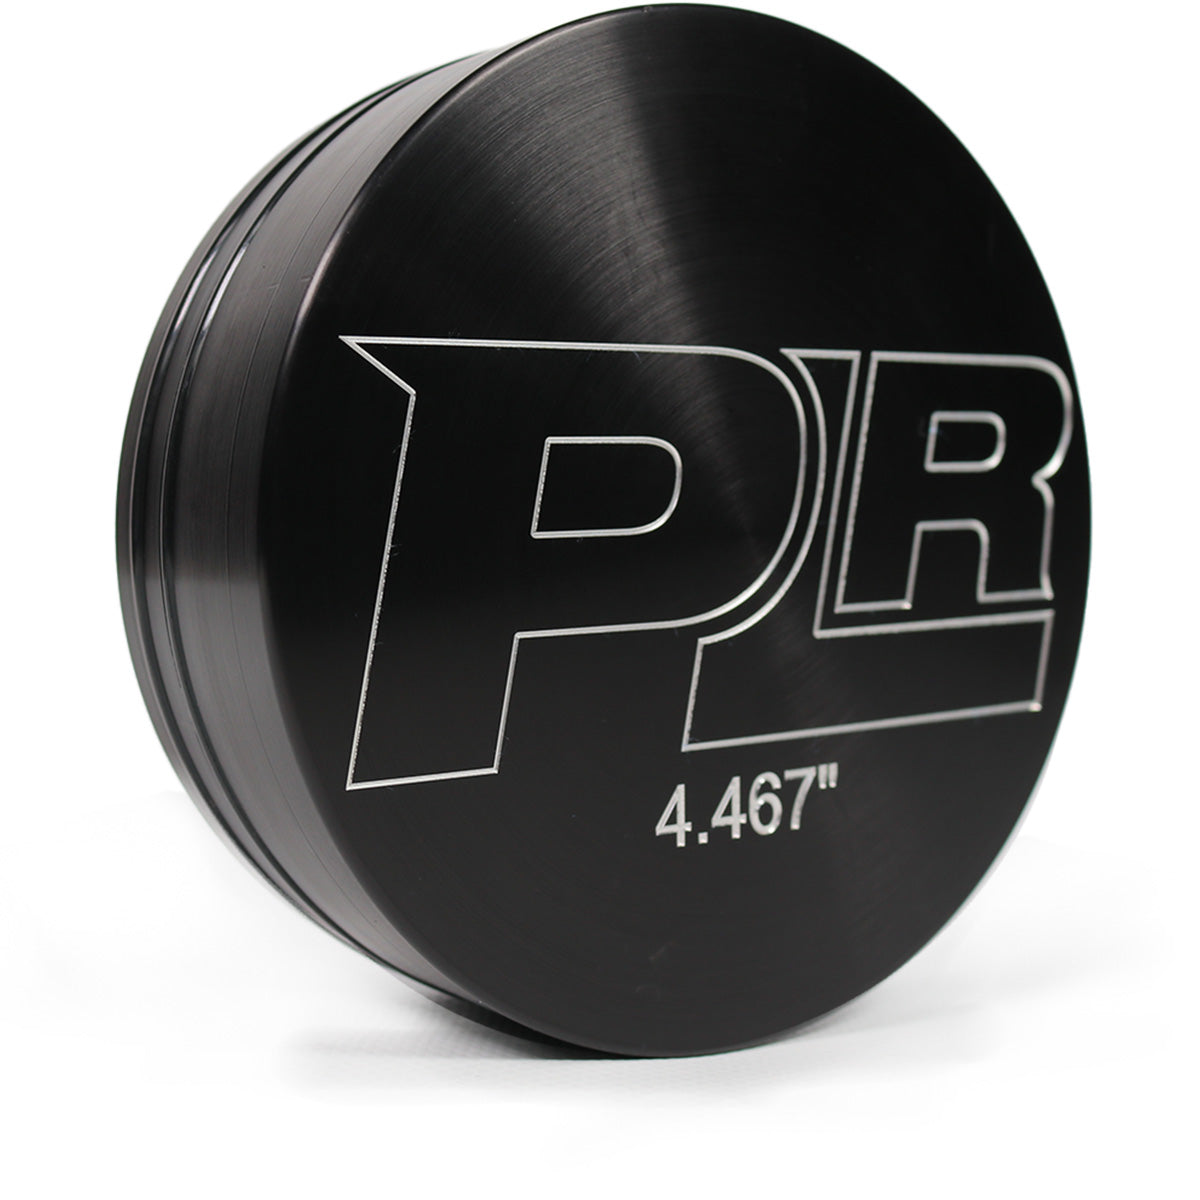 PLR HONING CUP (Handle Sold Separately)